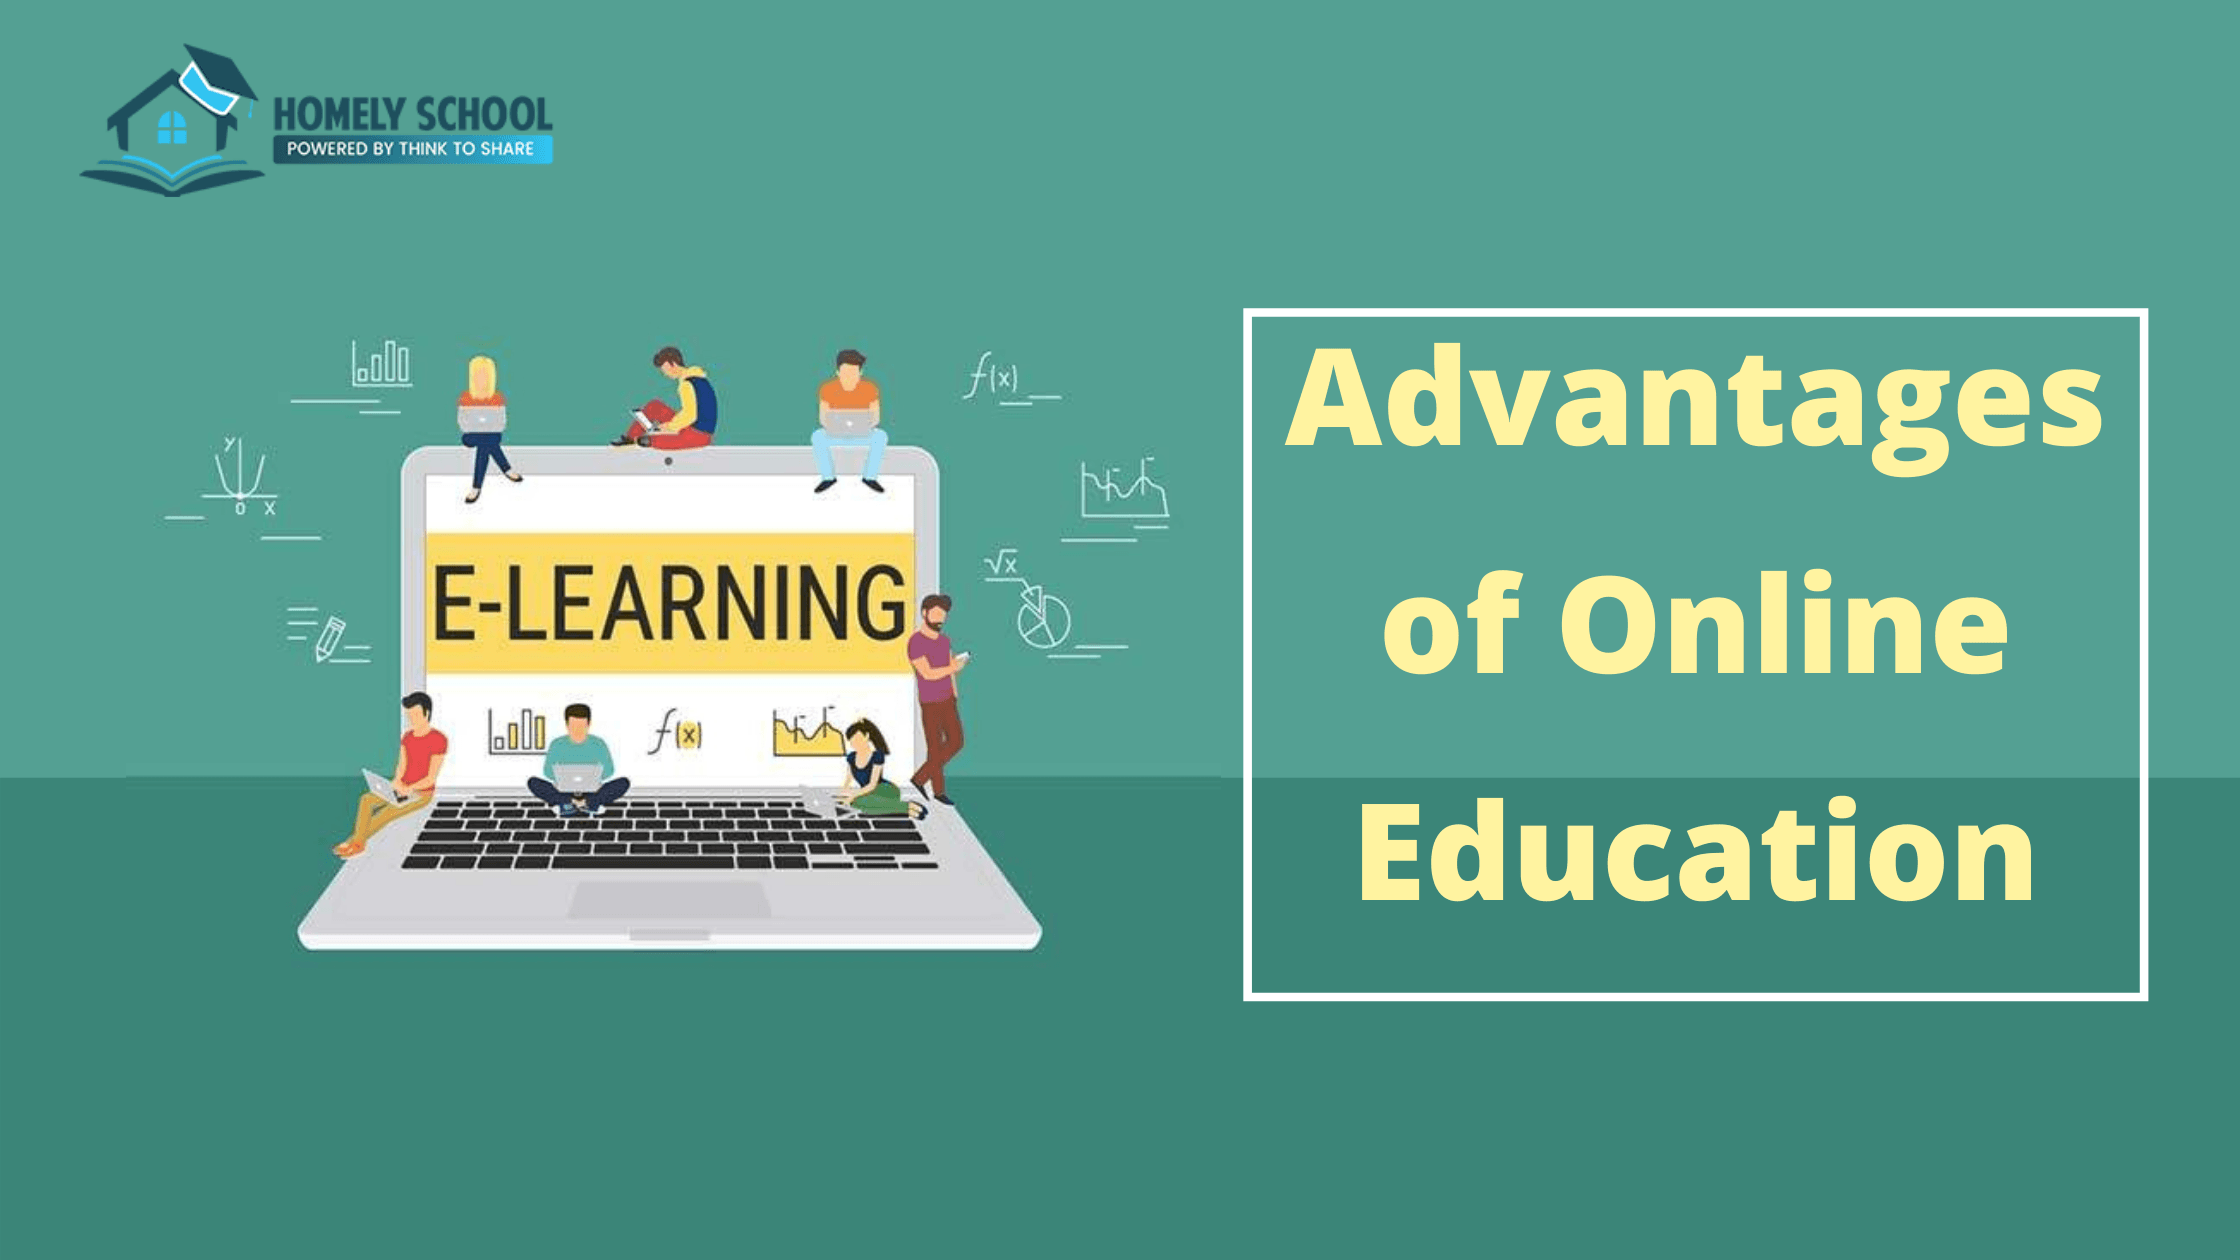 Know the Advantages of Online Education